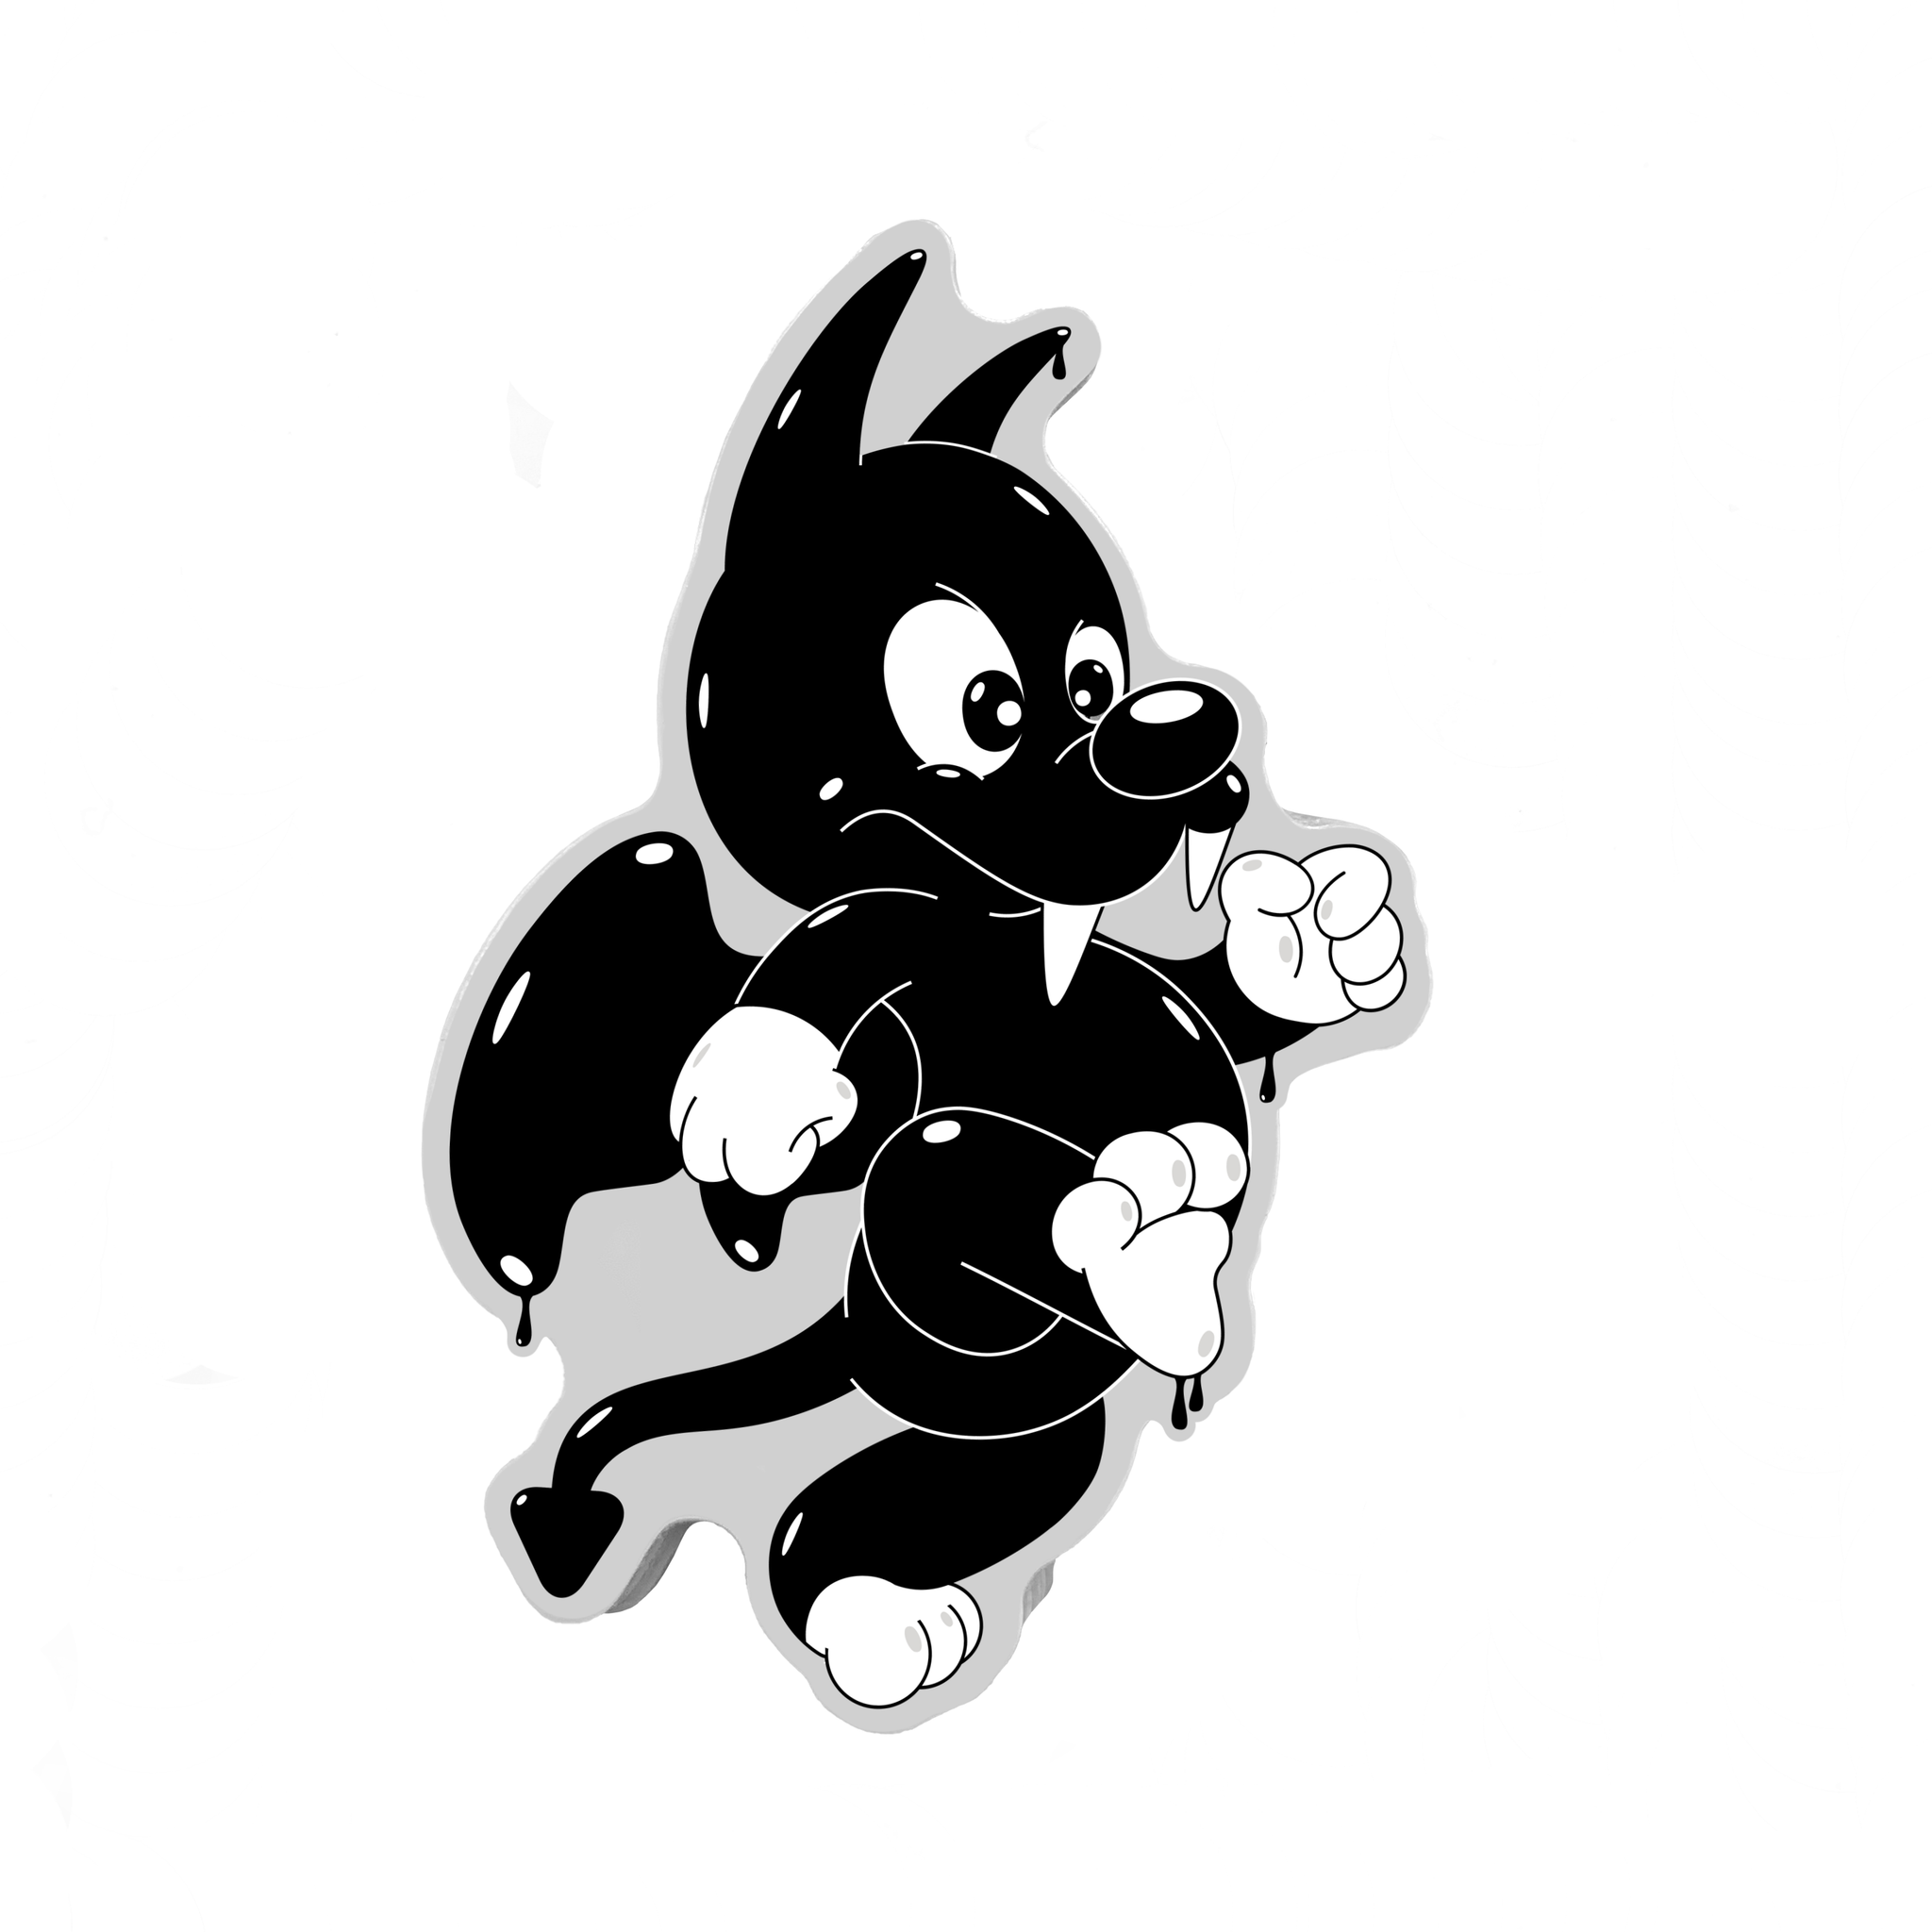 Vampy the Dog Lil' Champ Sticker (Inked! Collection)